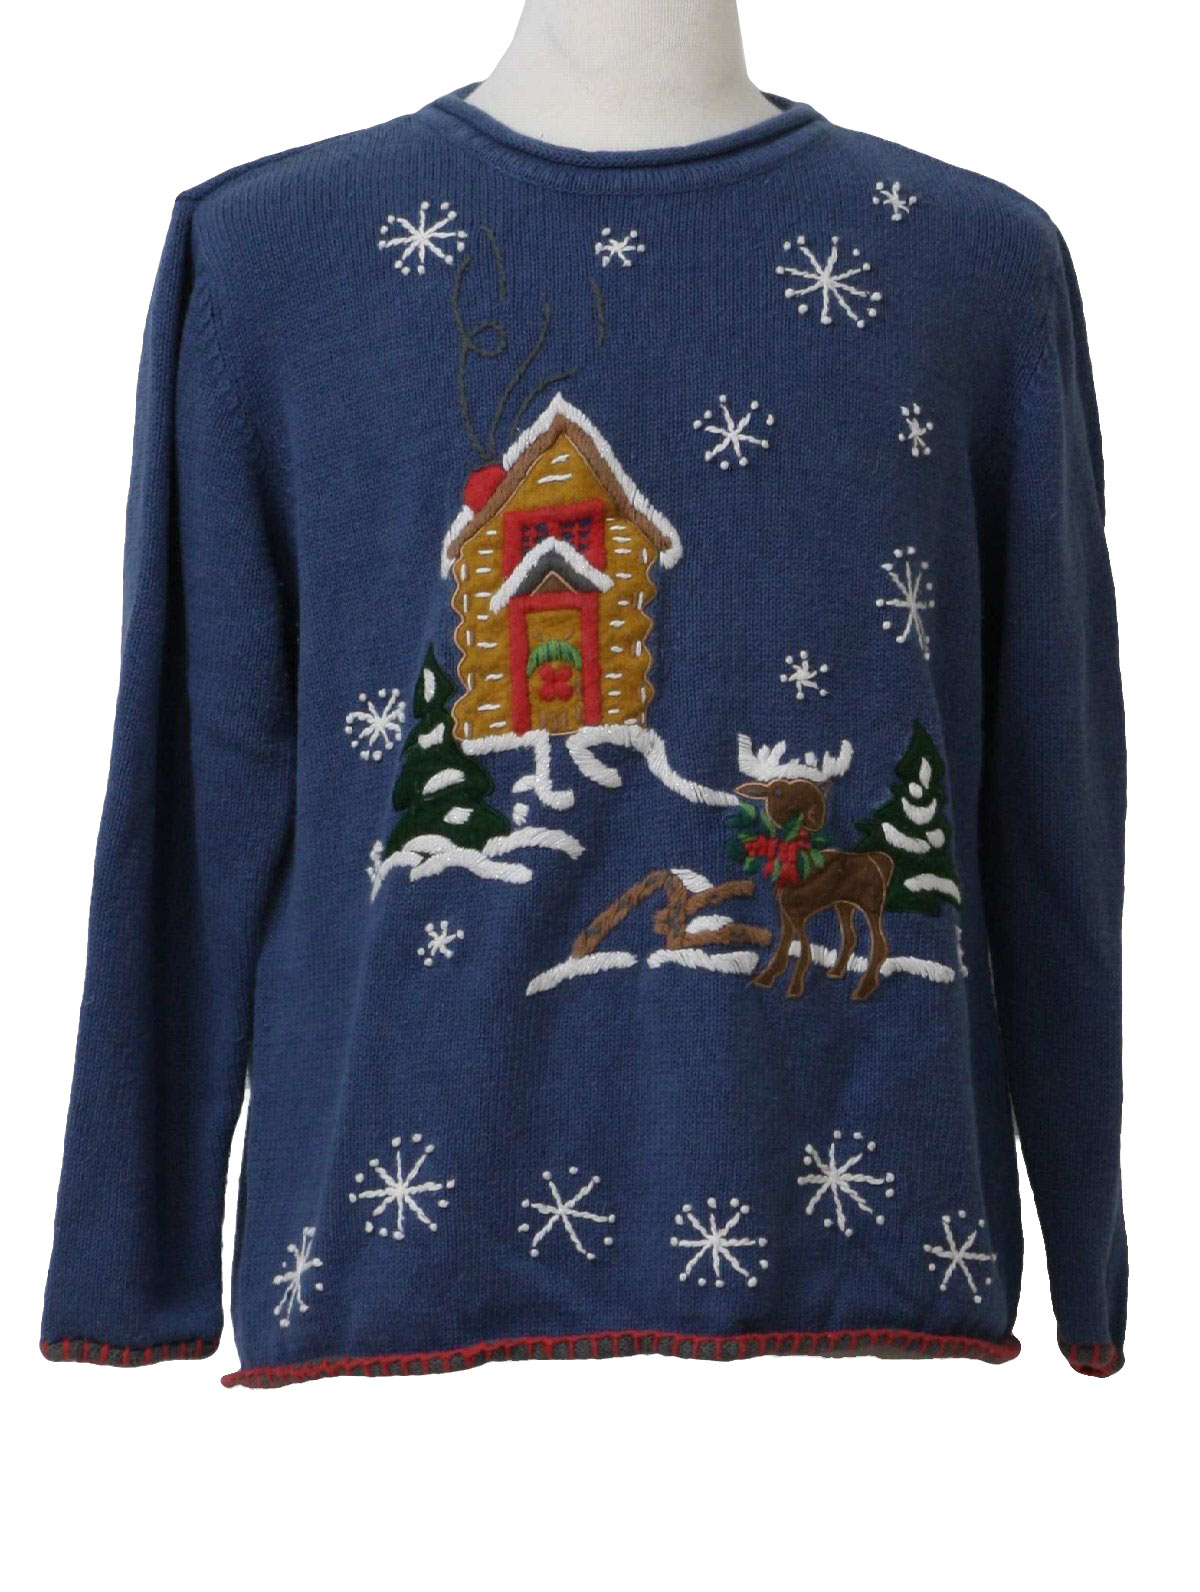 Ugly Christmas Sweater: -Cherokee- Unisex blue, white, and brown ...